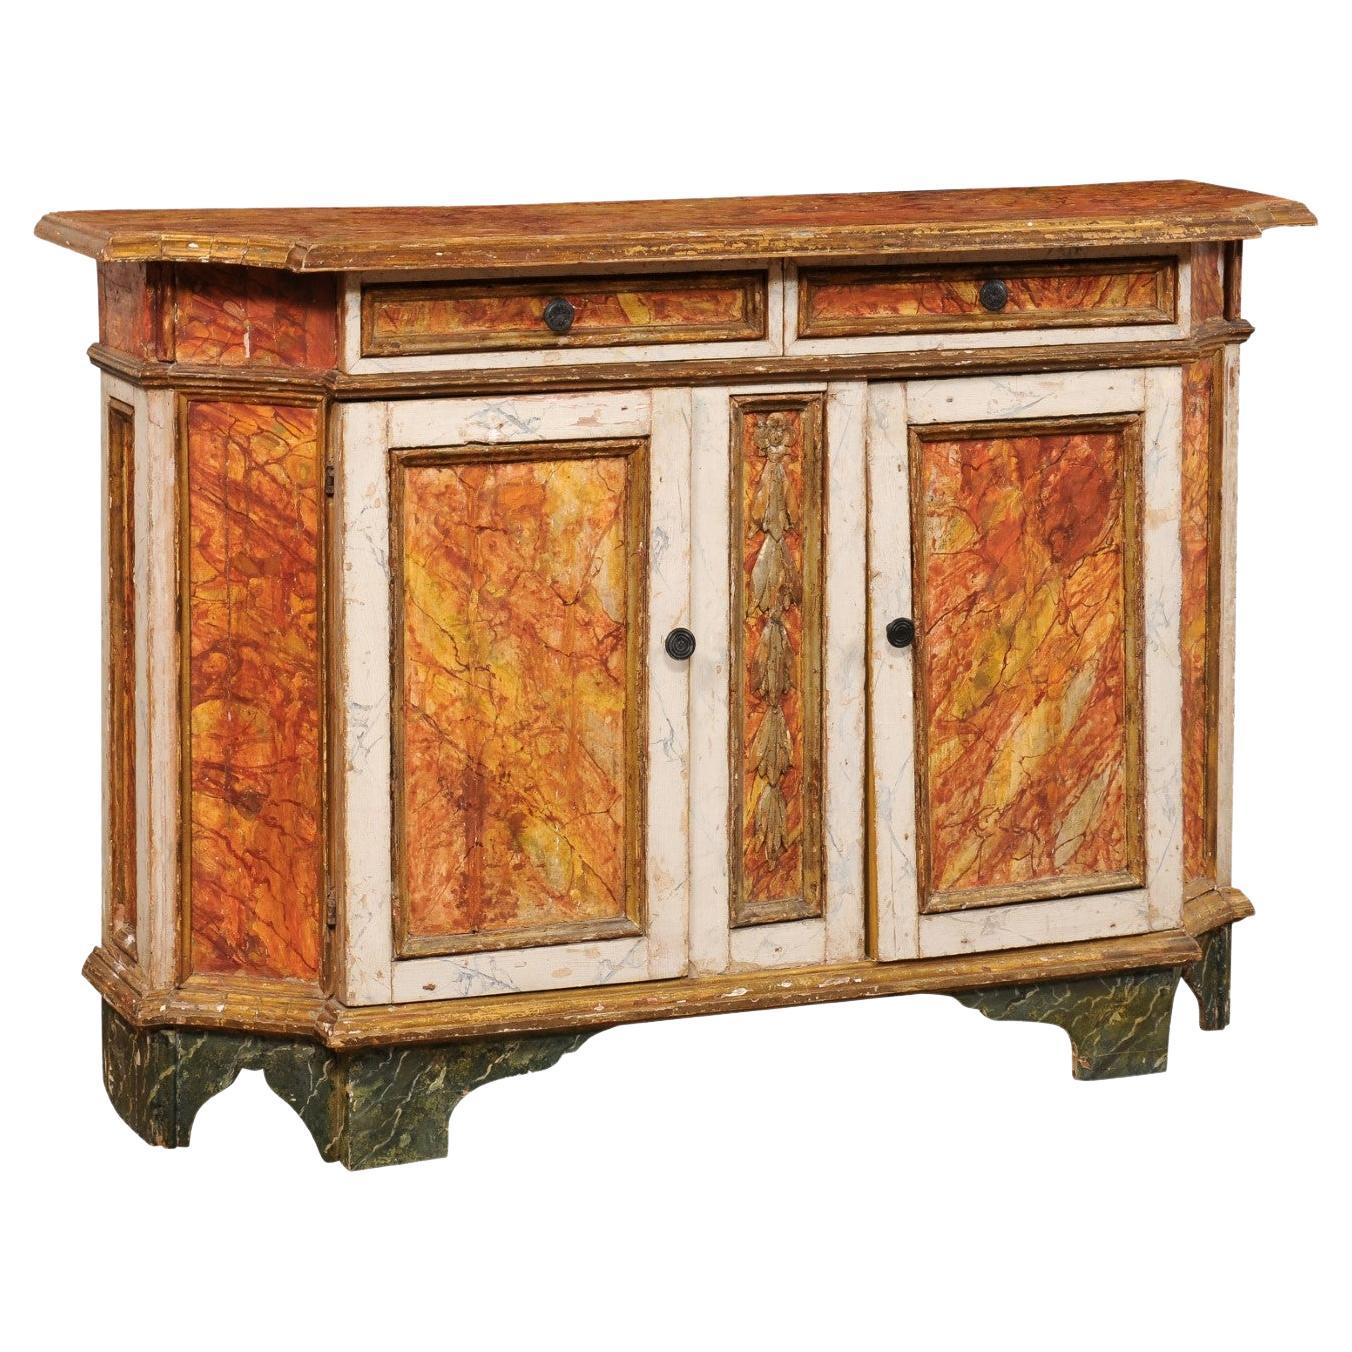 18th Century Italian Credenza Console w/its Original Hand-Painted Finish For Sale